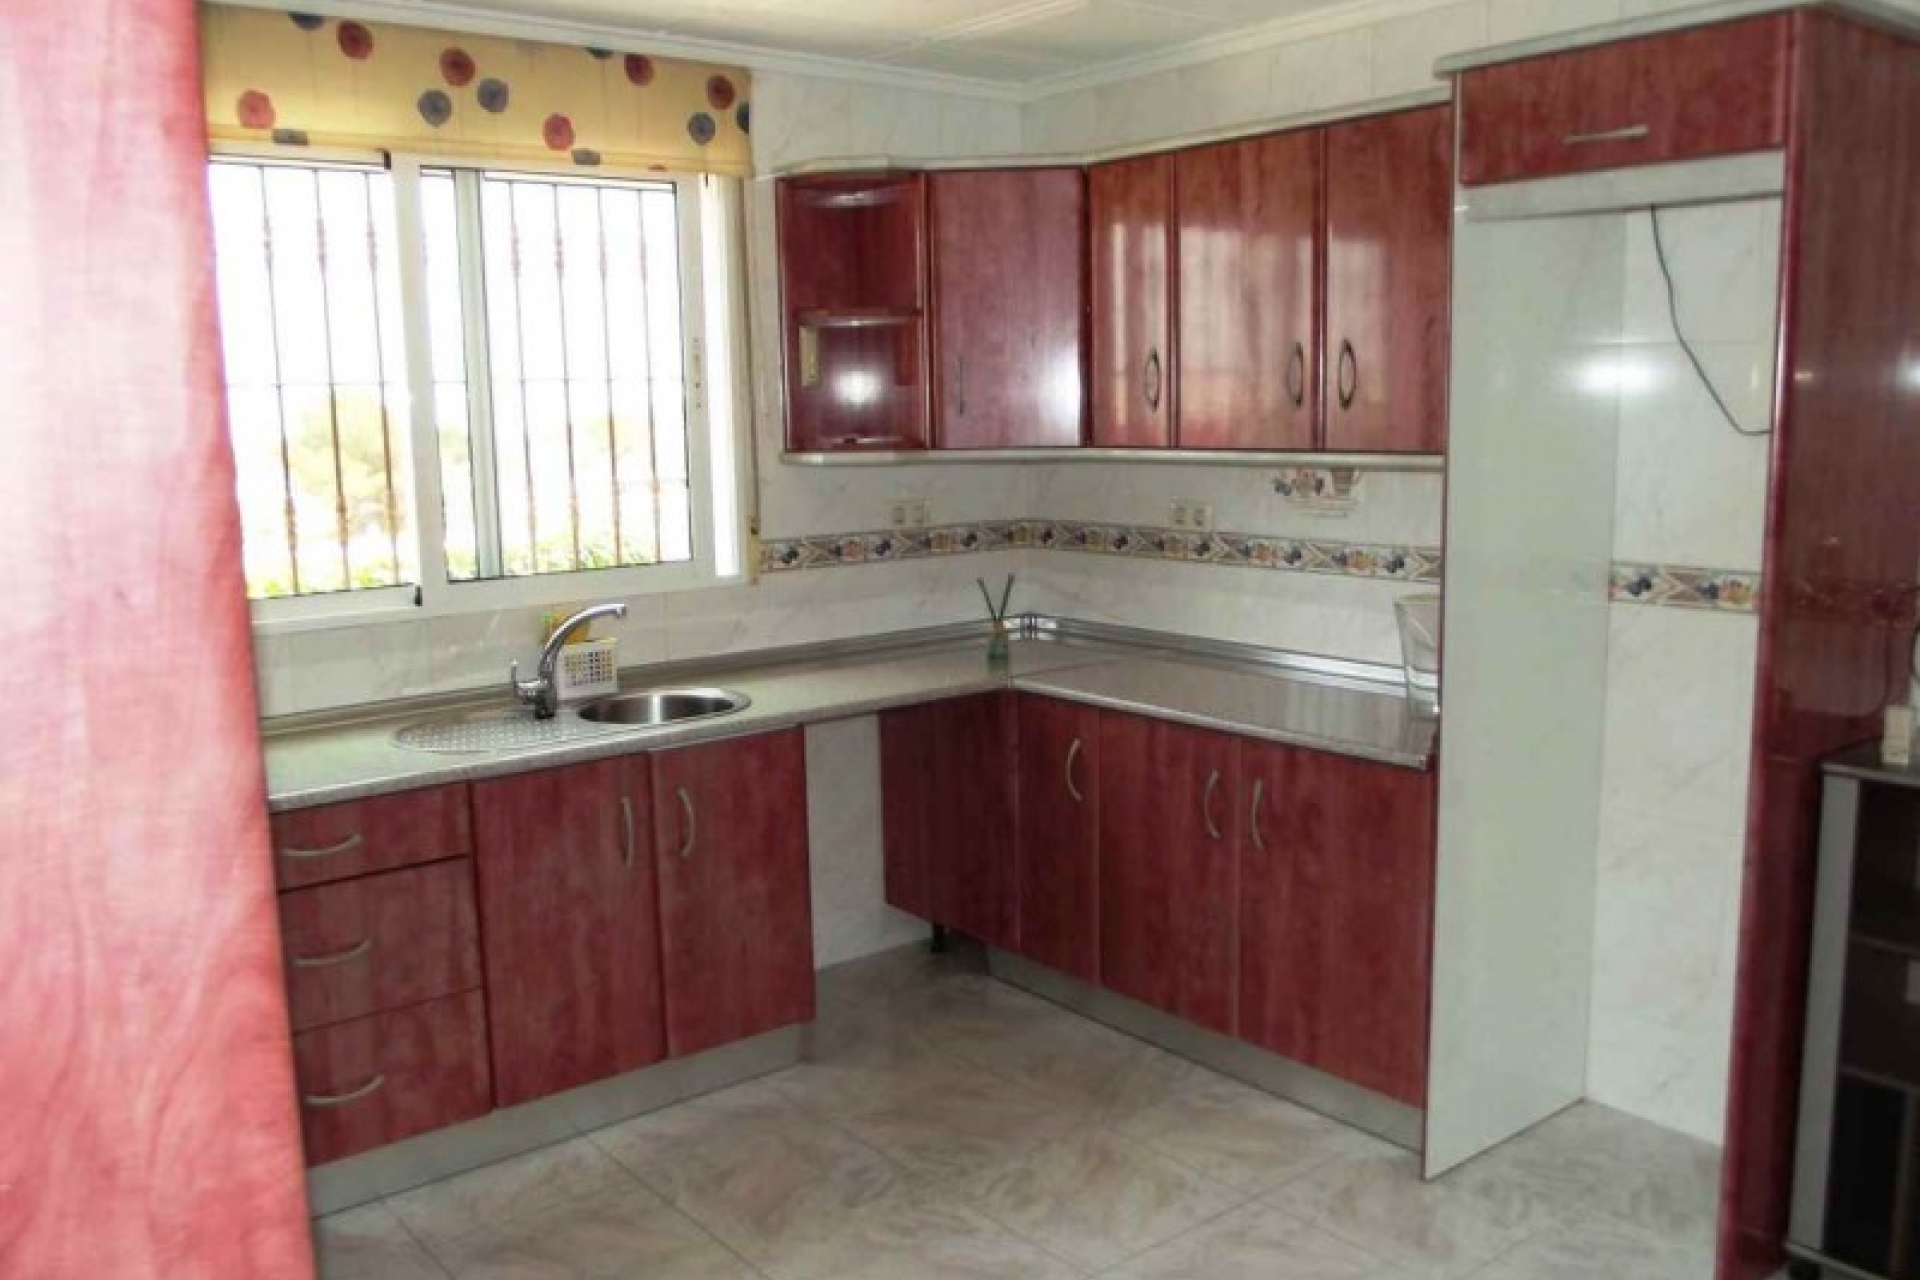 Jacarilla property for sale cheap property for sale bargain